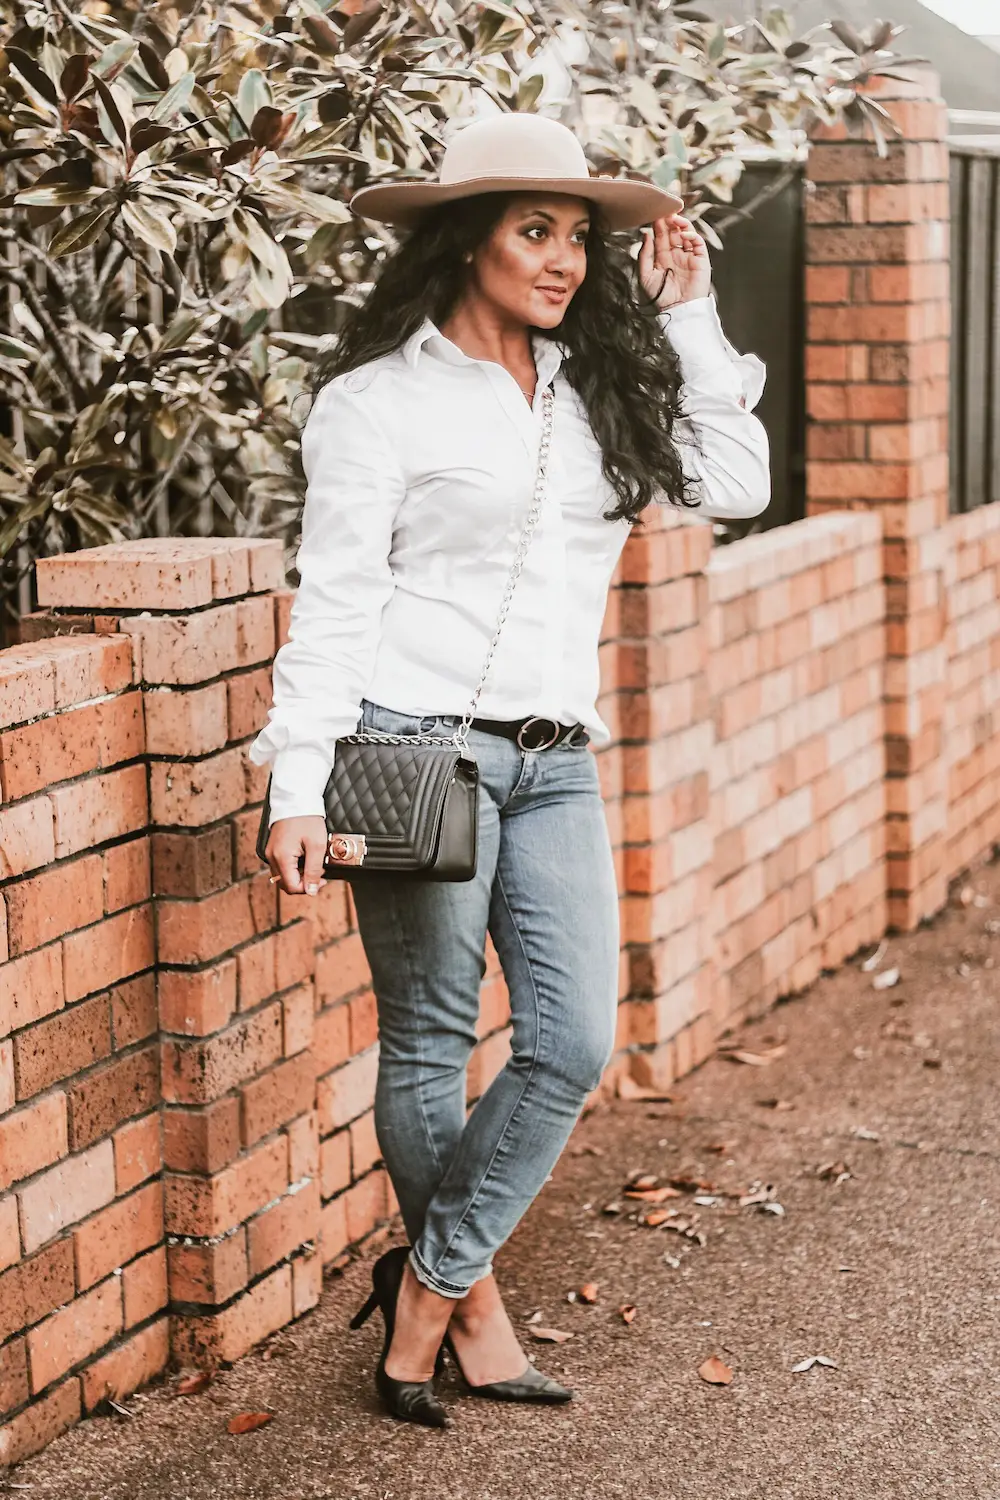 Parisian Style Best White Shirts For Women French Style Classic Women's White Shirt Paris Chic Style Button Down Long Sleeve Shirt White Skinny Jeans Auckland New Zealand StreetStyle Wear How to dress like a Parisian French Girl Style